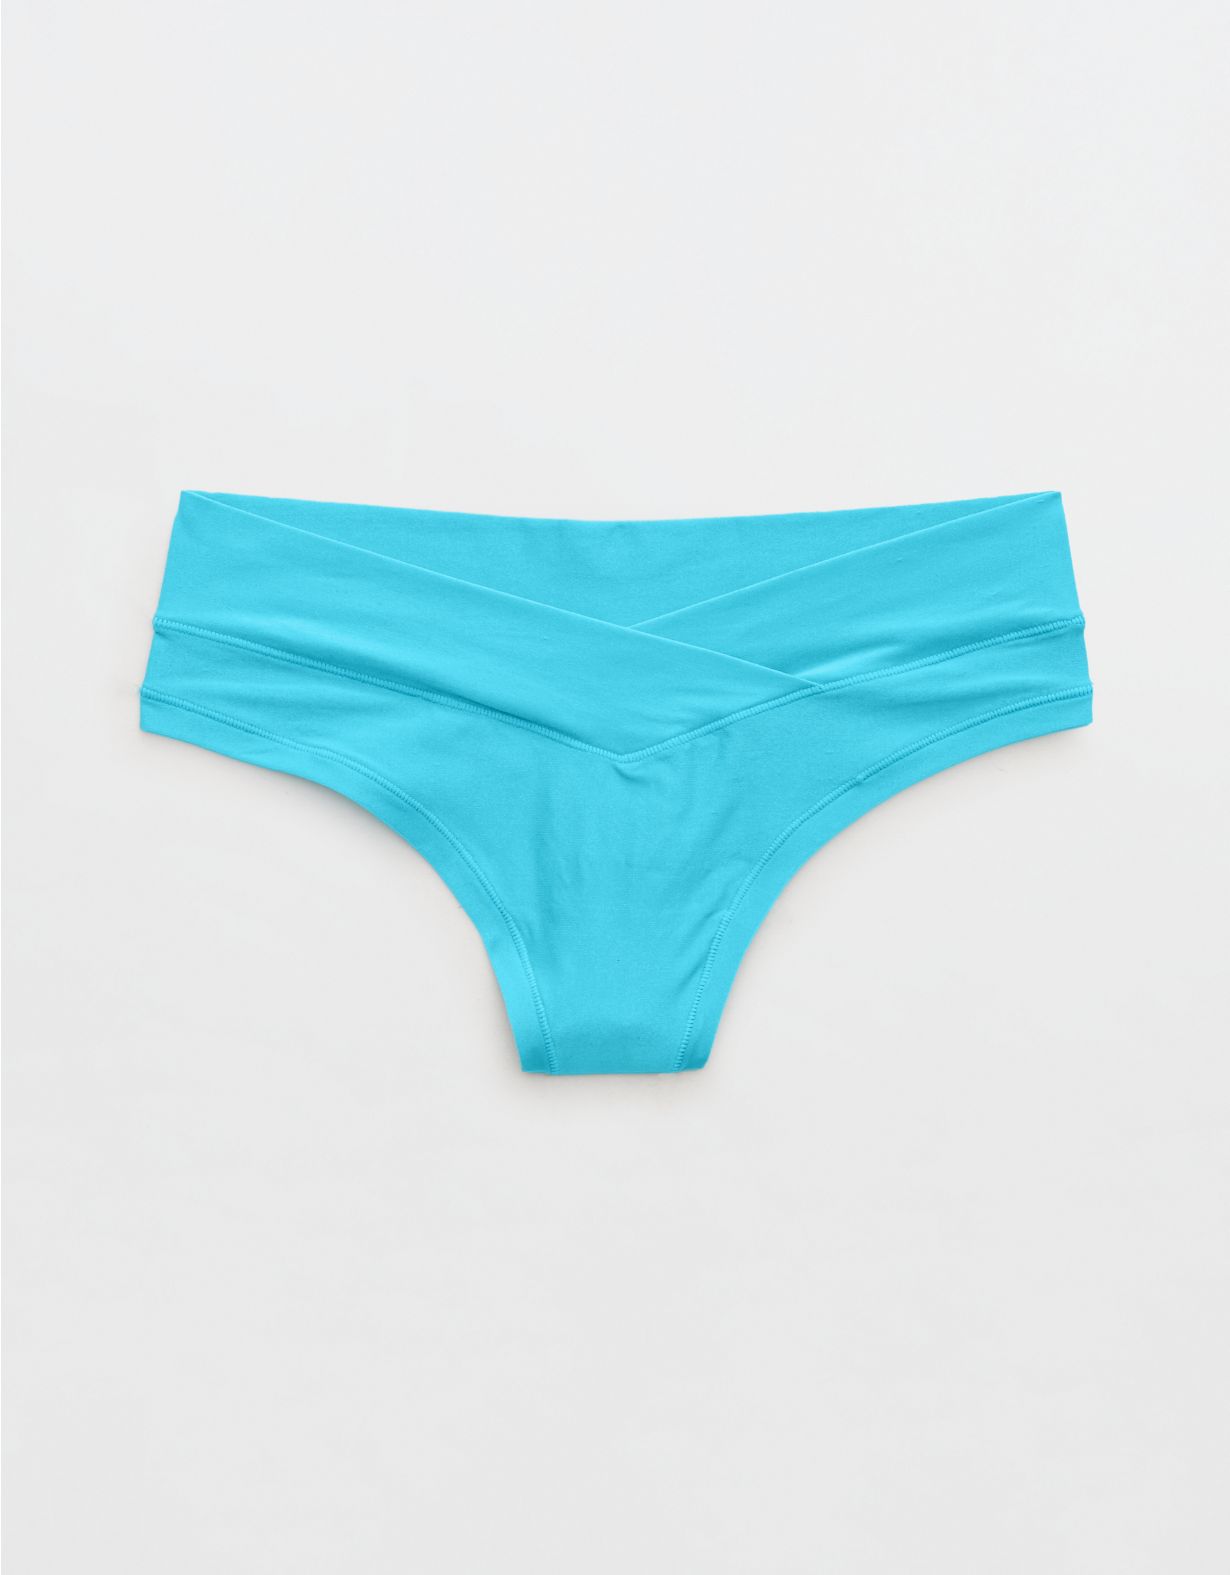 SMOOTHEZ Everyday Crossover Thong Underwear